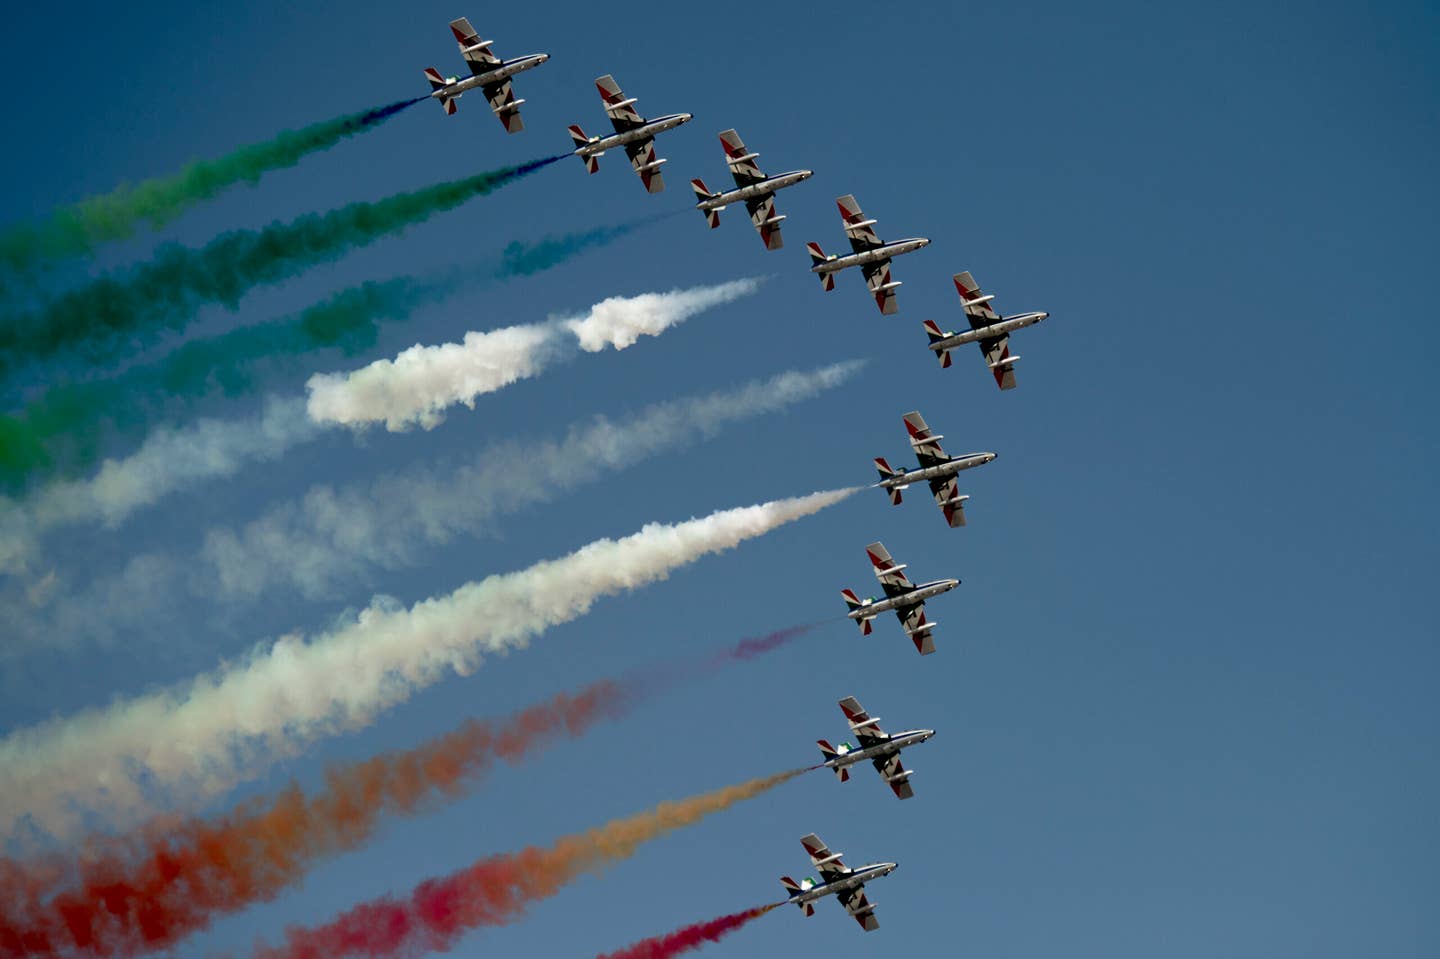 The Frecce Tricolore performs at the 2015 Dubai Air Show. (U.S. Air Force via Wikimedia Commons)